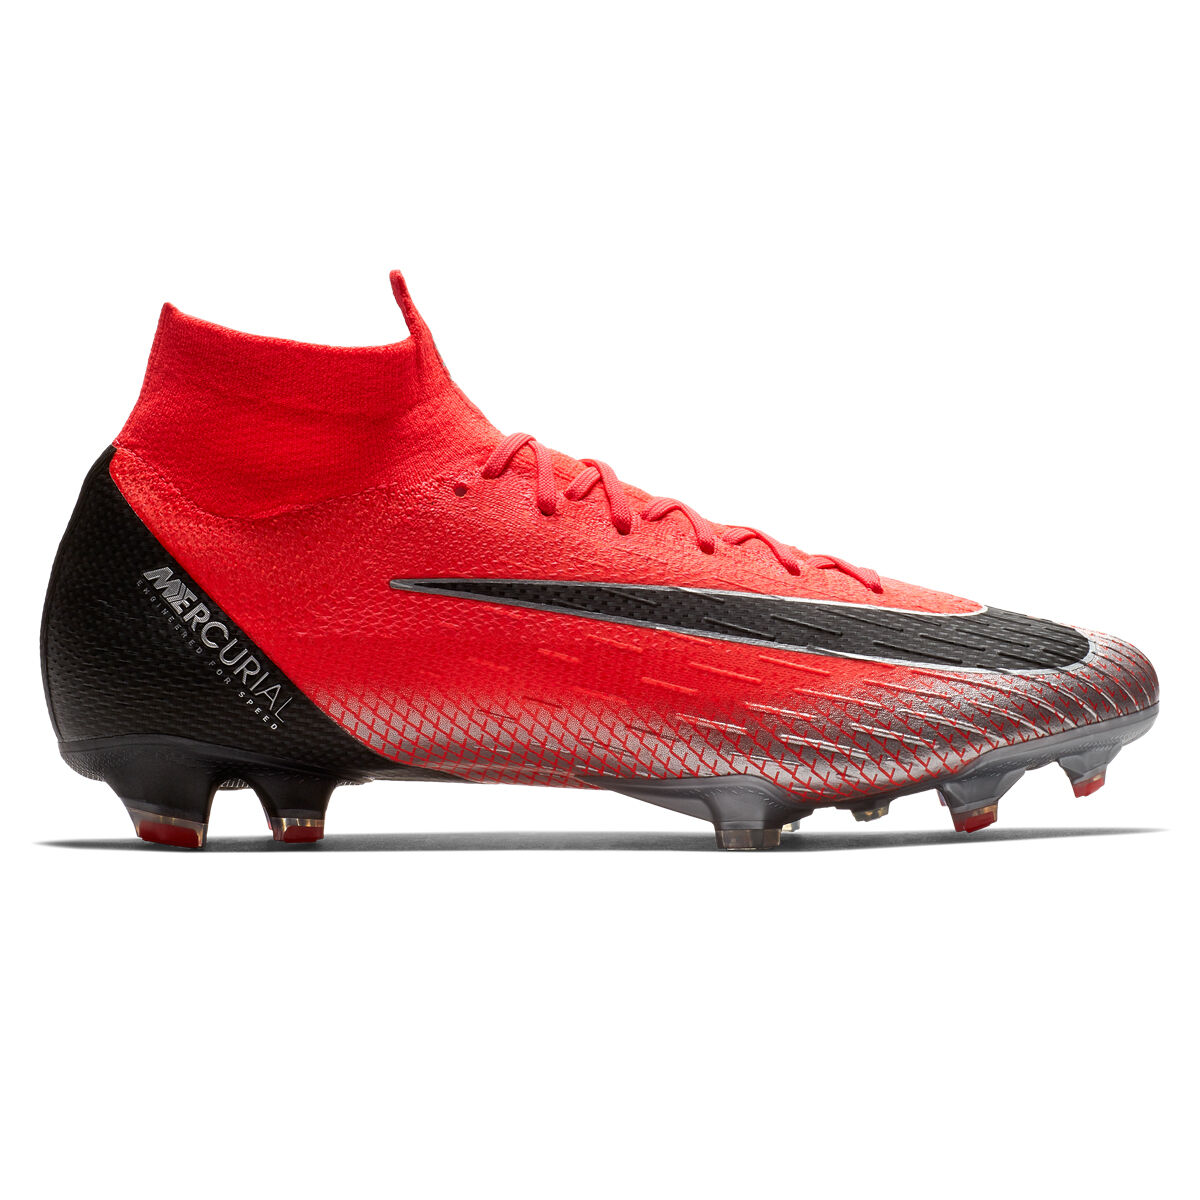 cr7 kids boots sale | Up to 40% Discounts